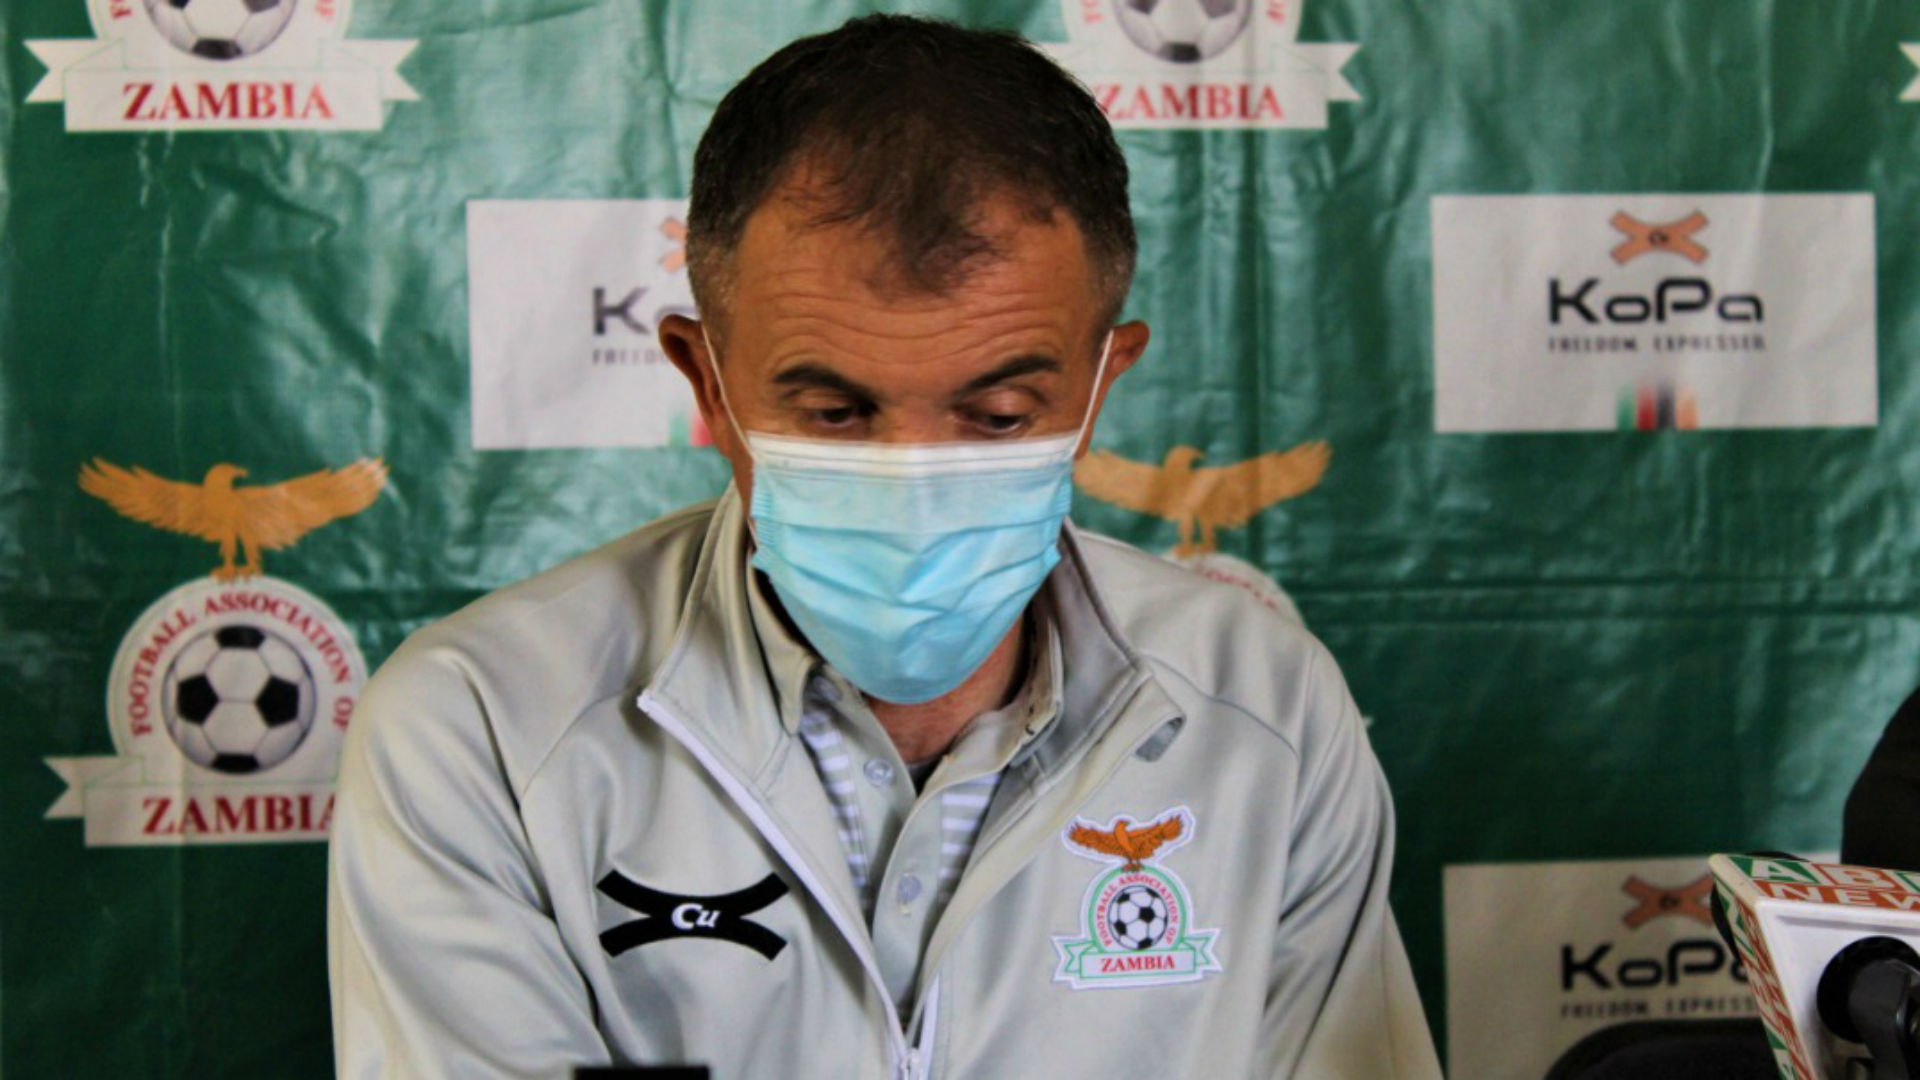 ‘We are determined to establish iron discipline’ – Zambia’s Sredojevic after Chongo release